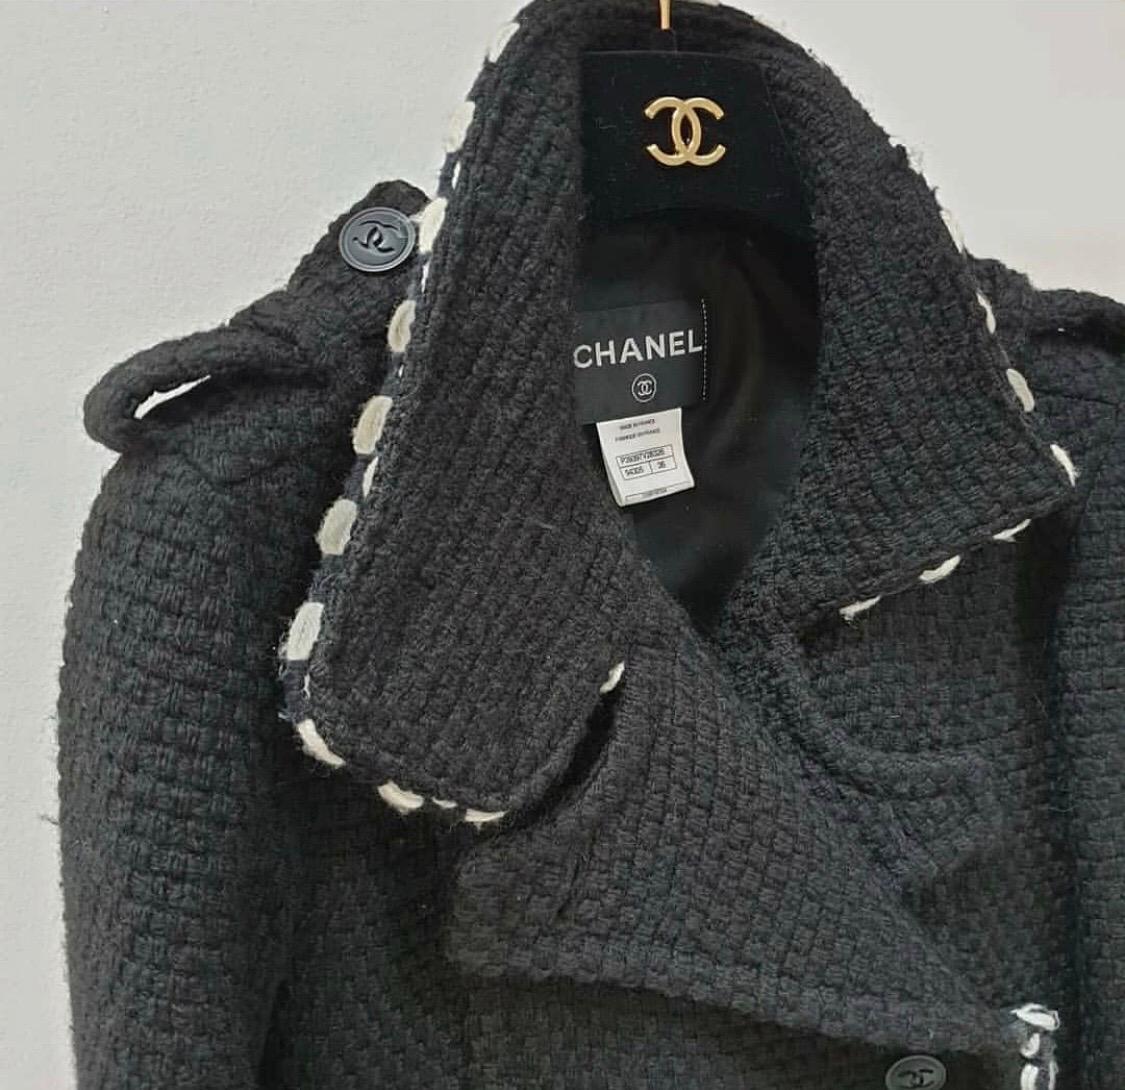 Chanel Black Wool Short Length Coat CC Buttons

Product details:
Size FR 36
Double lined  navy silk fabric 
CC buttons
Front button closure 
100% Wool
Very good condition.
For buyers from EU we can provide shipping from Poland. Please demand if you